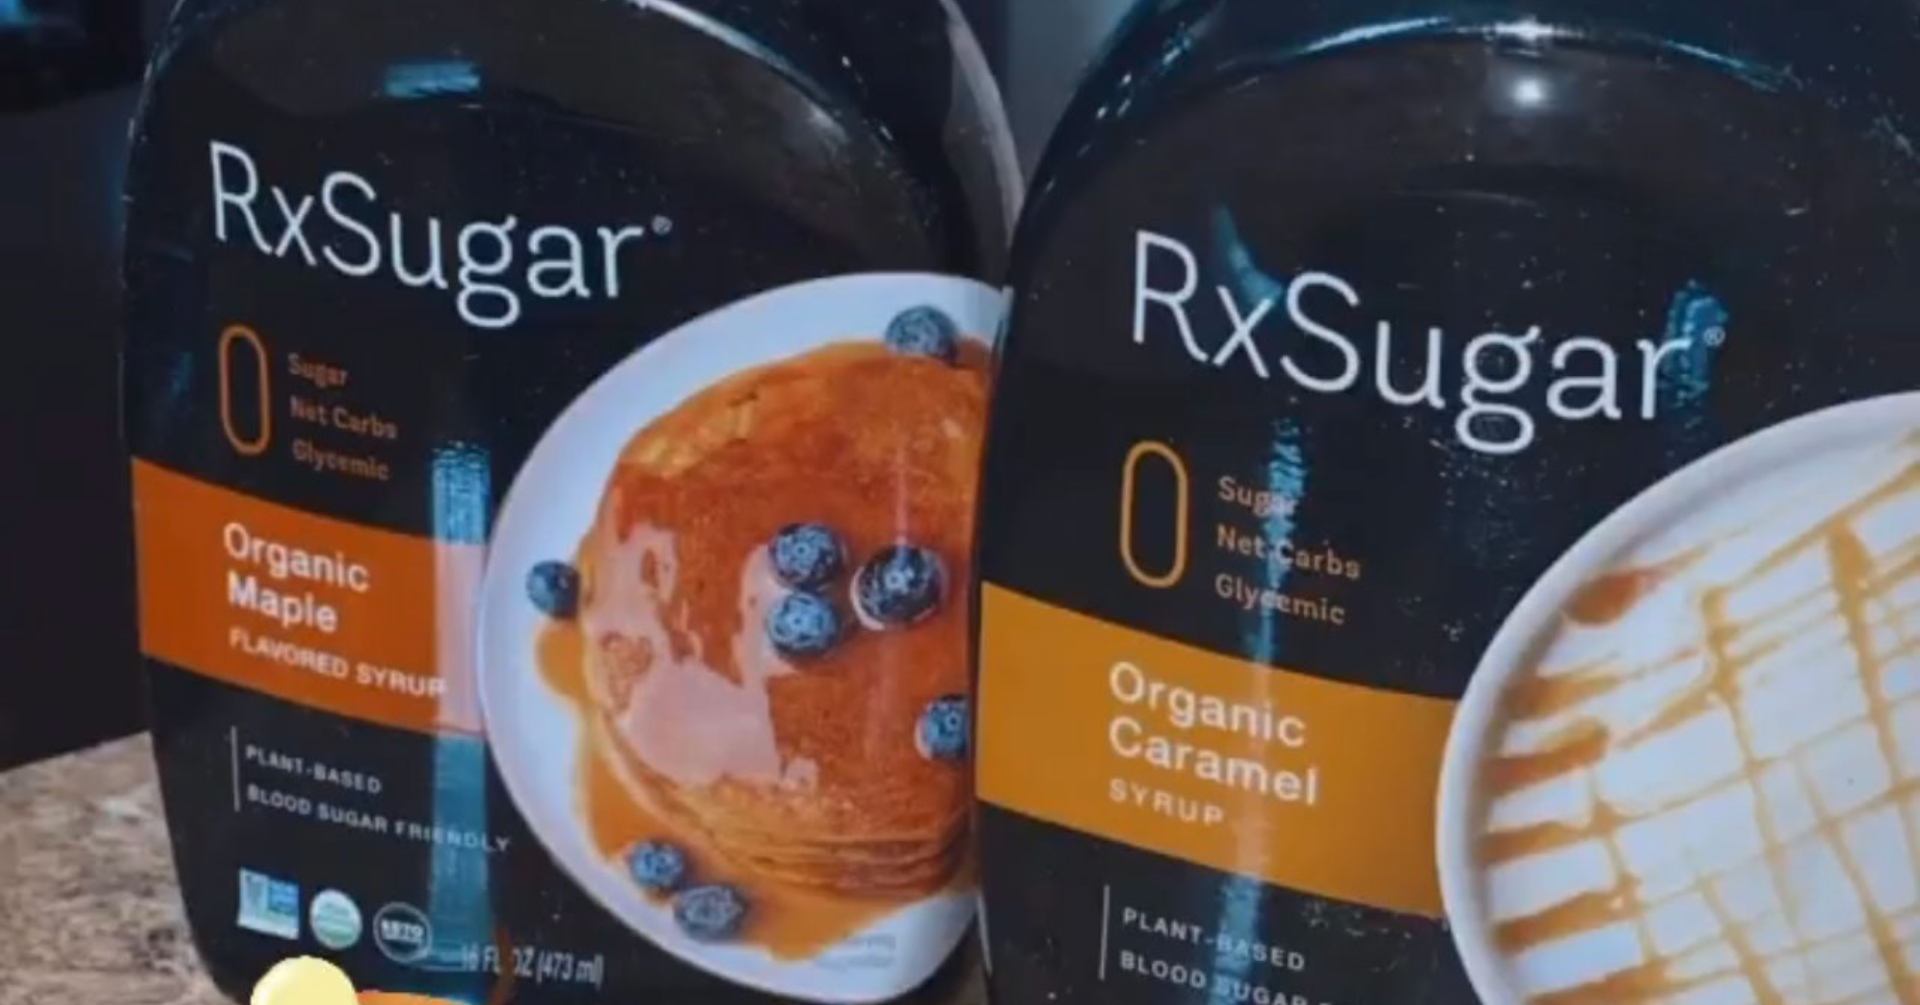 Christina Keto 91413 Excited About Her New RxSugar!